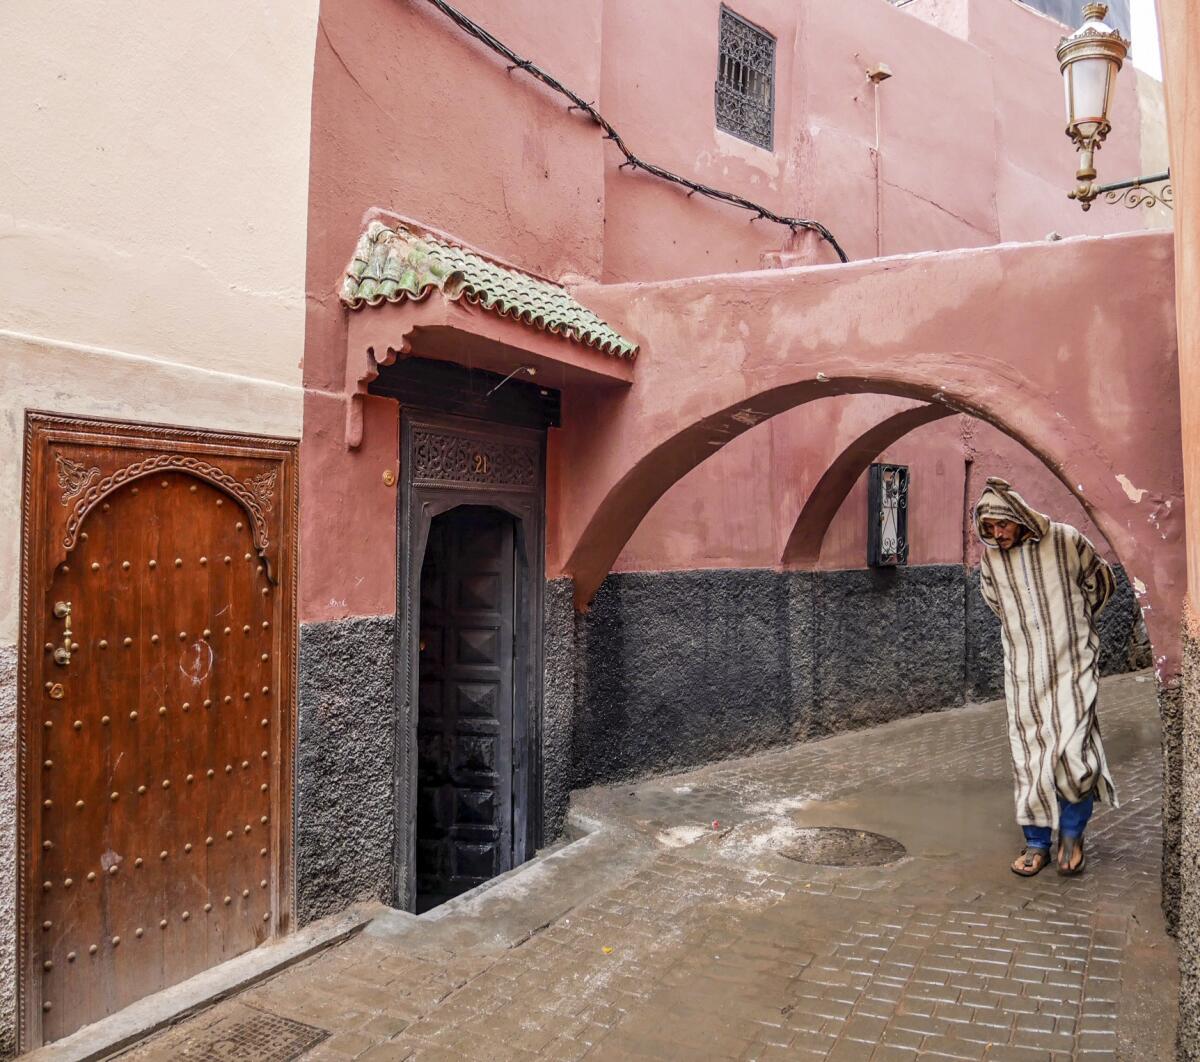 A man in a djellaba, a long, loose-fitting robe, ducks under one of the many archways in the ancient walled city in Fez.